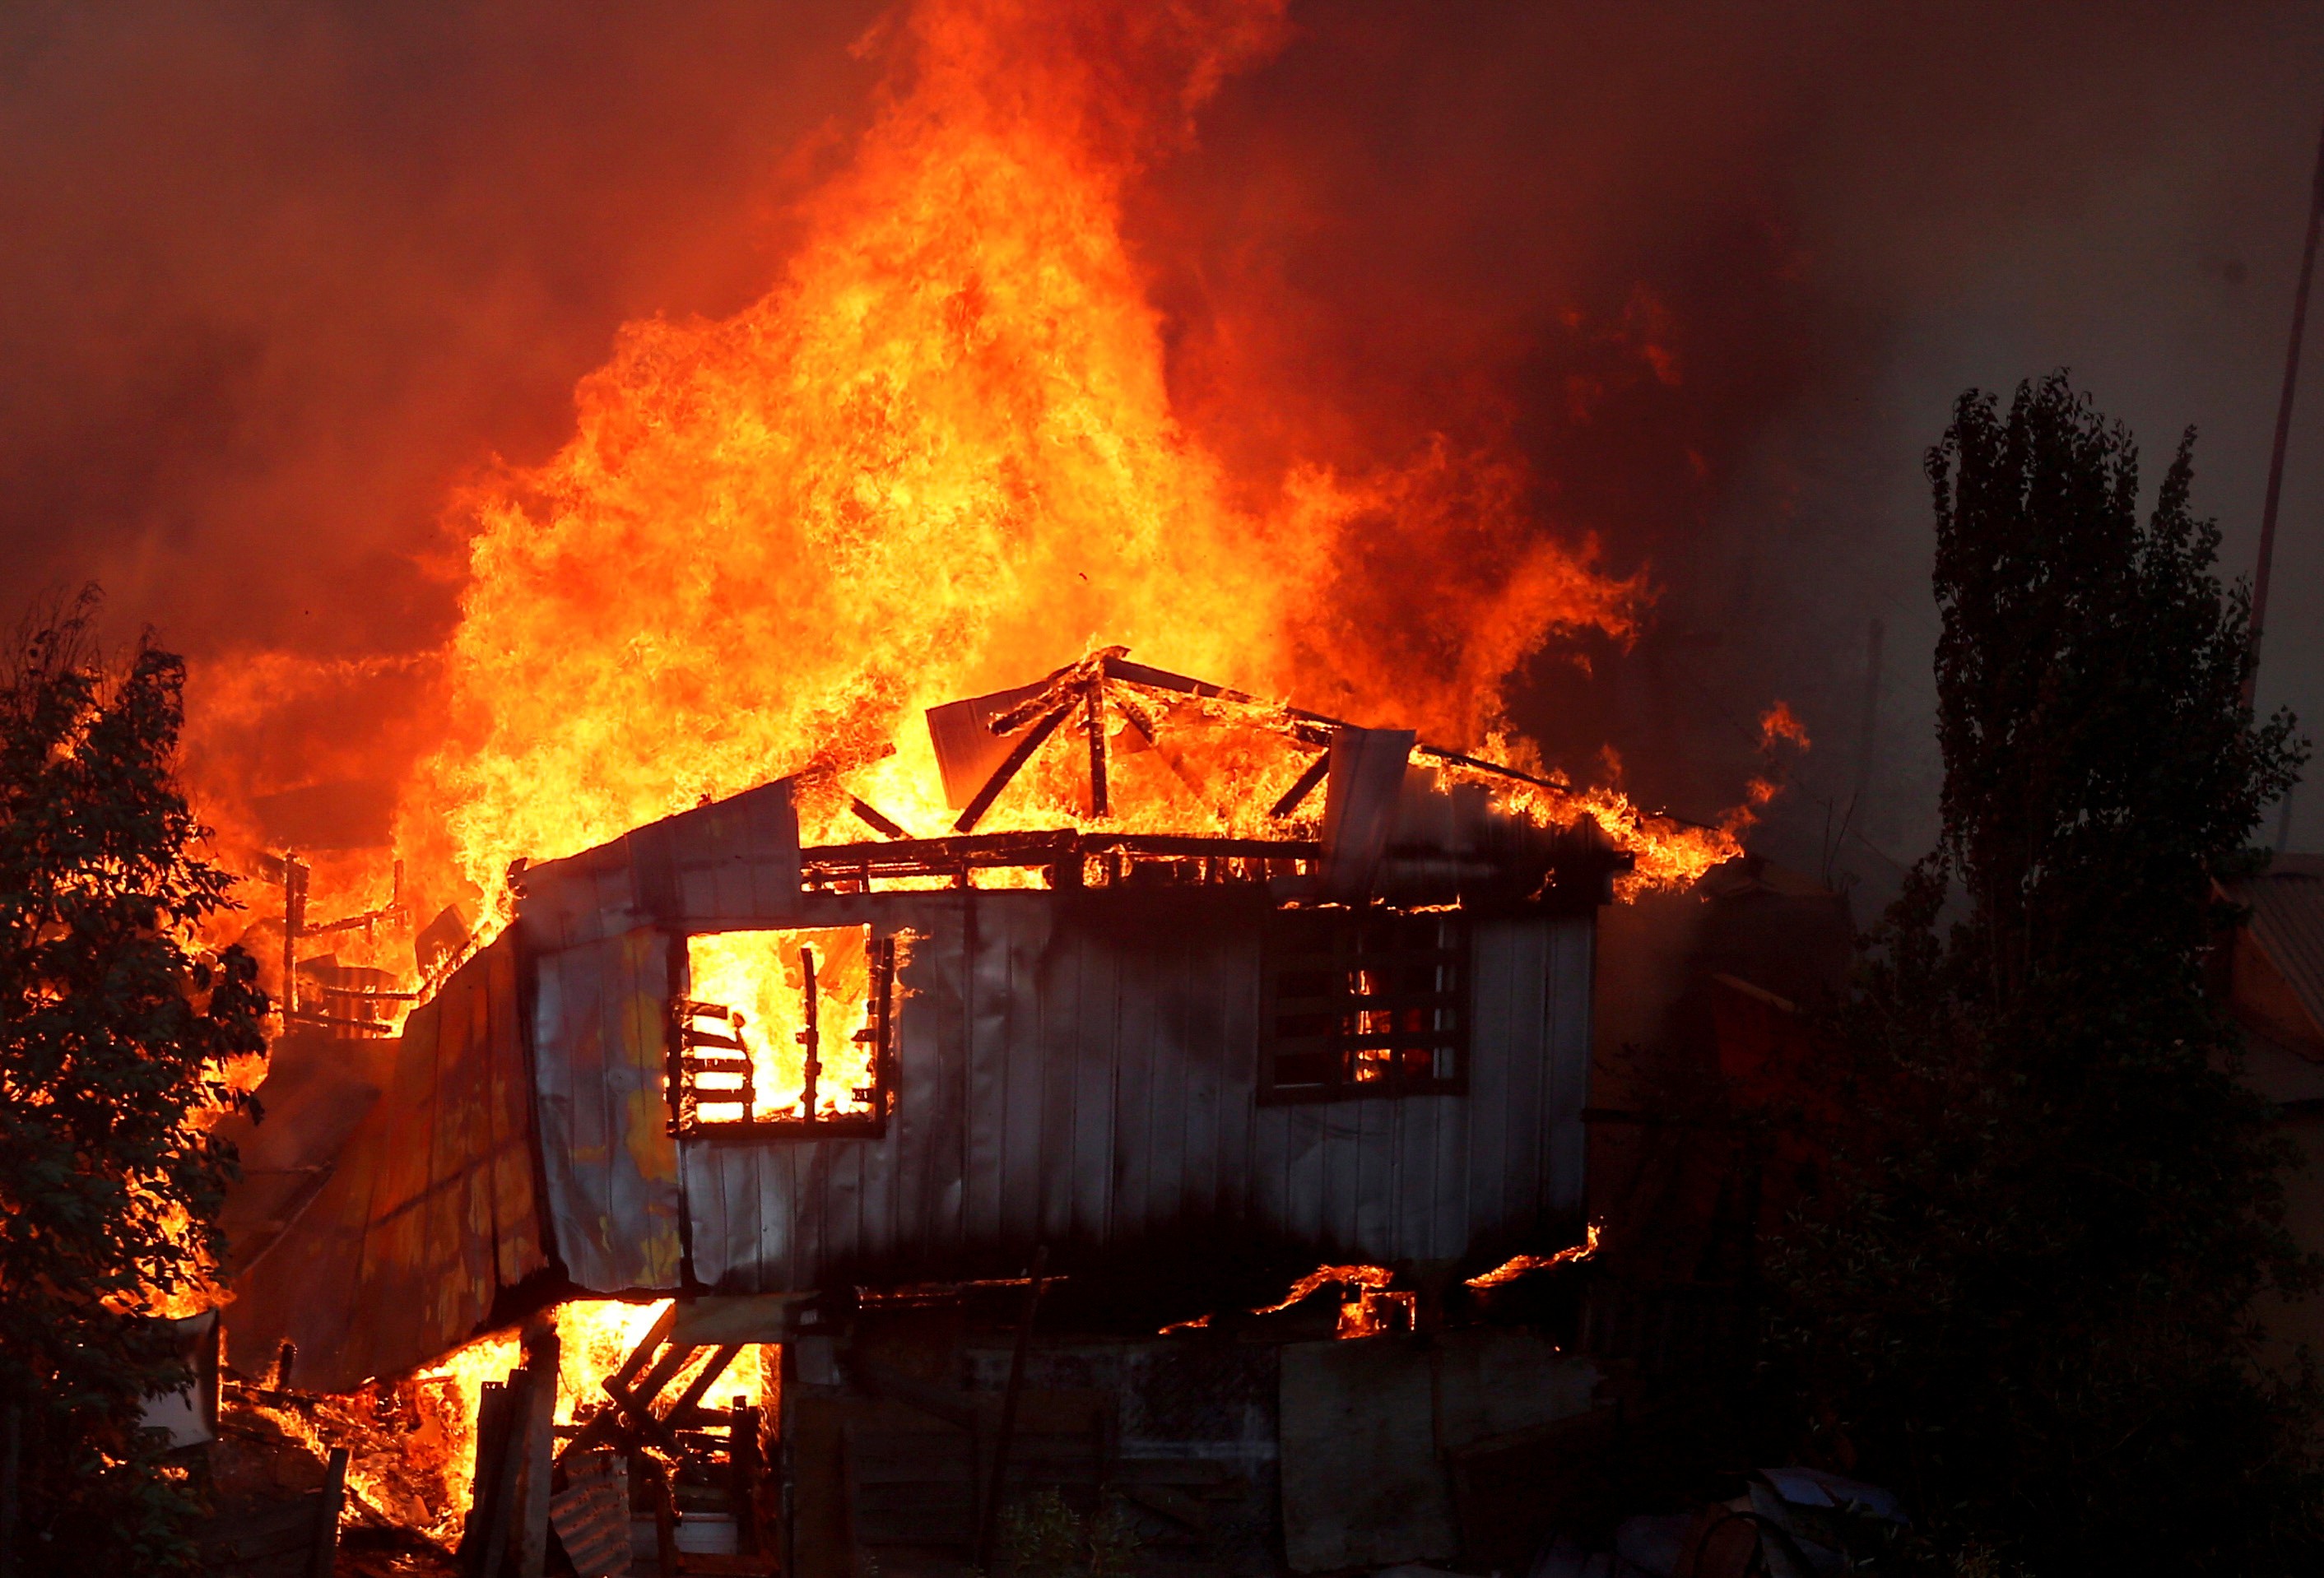 A house burns as a fire spreads in Valparaiso, Chile, on Tuesday. Photo: Reuters